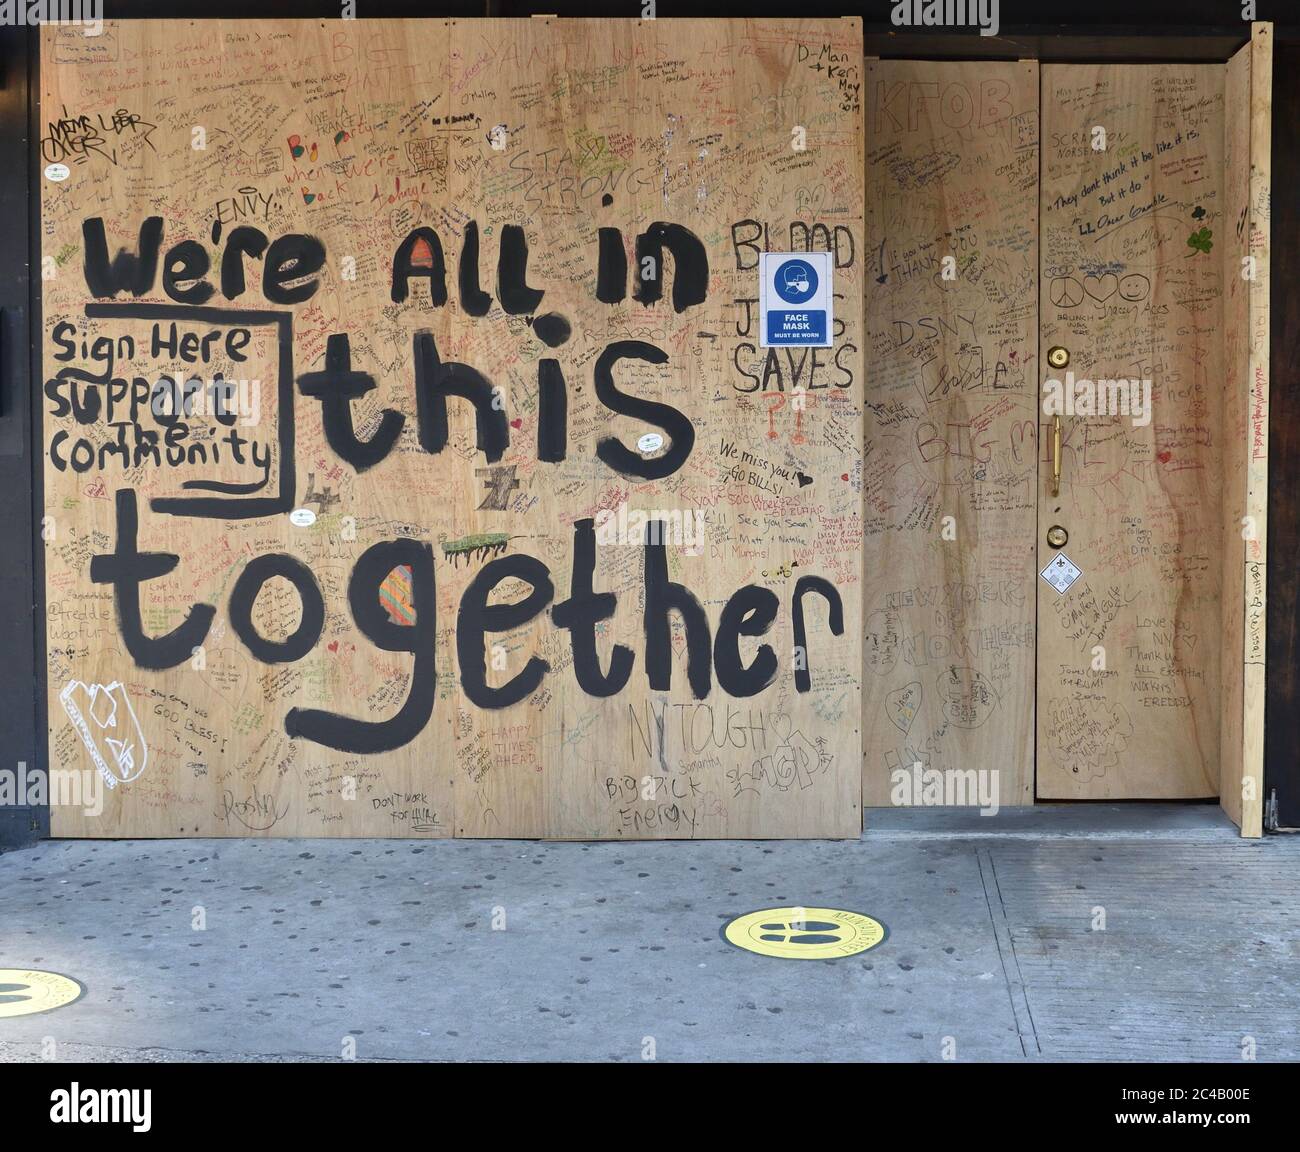 Plywood storefront with hand-painted message 'We're all in this together. Sign here support the community', May 14, 2020, in New York. Stock Photo